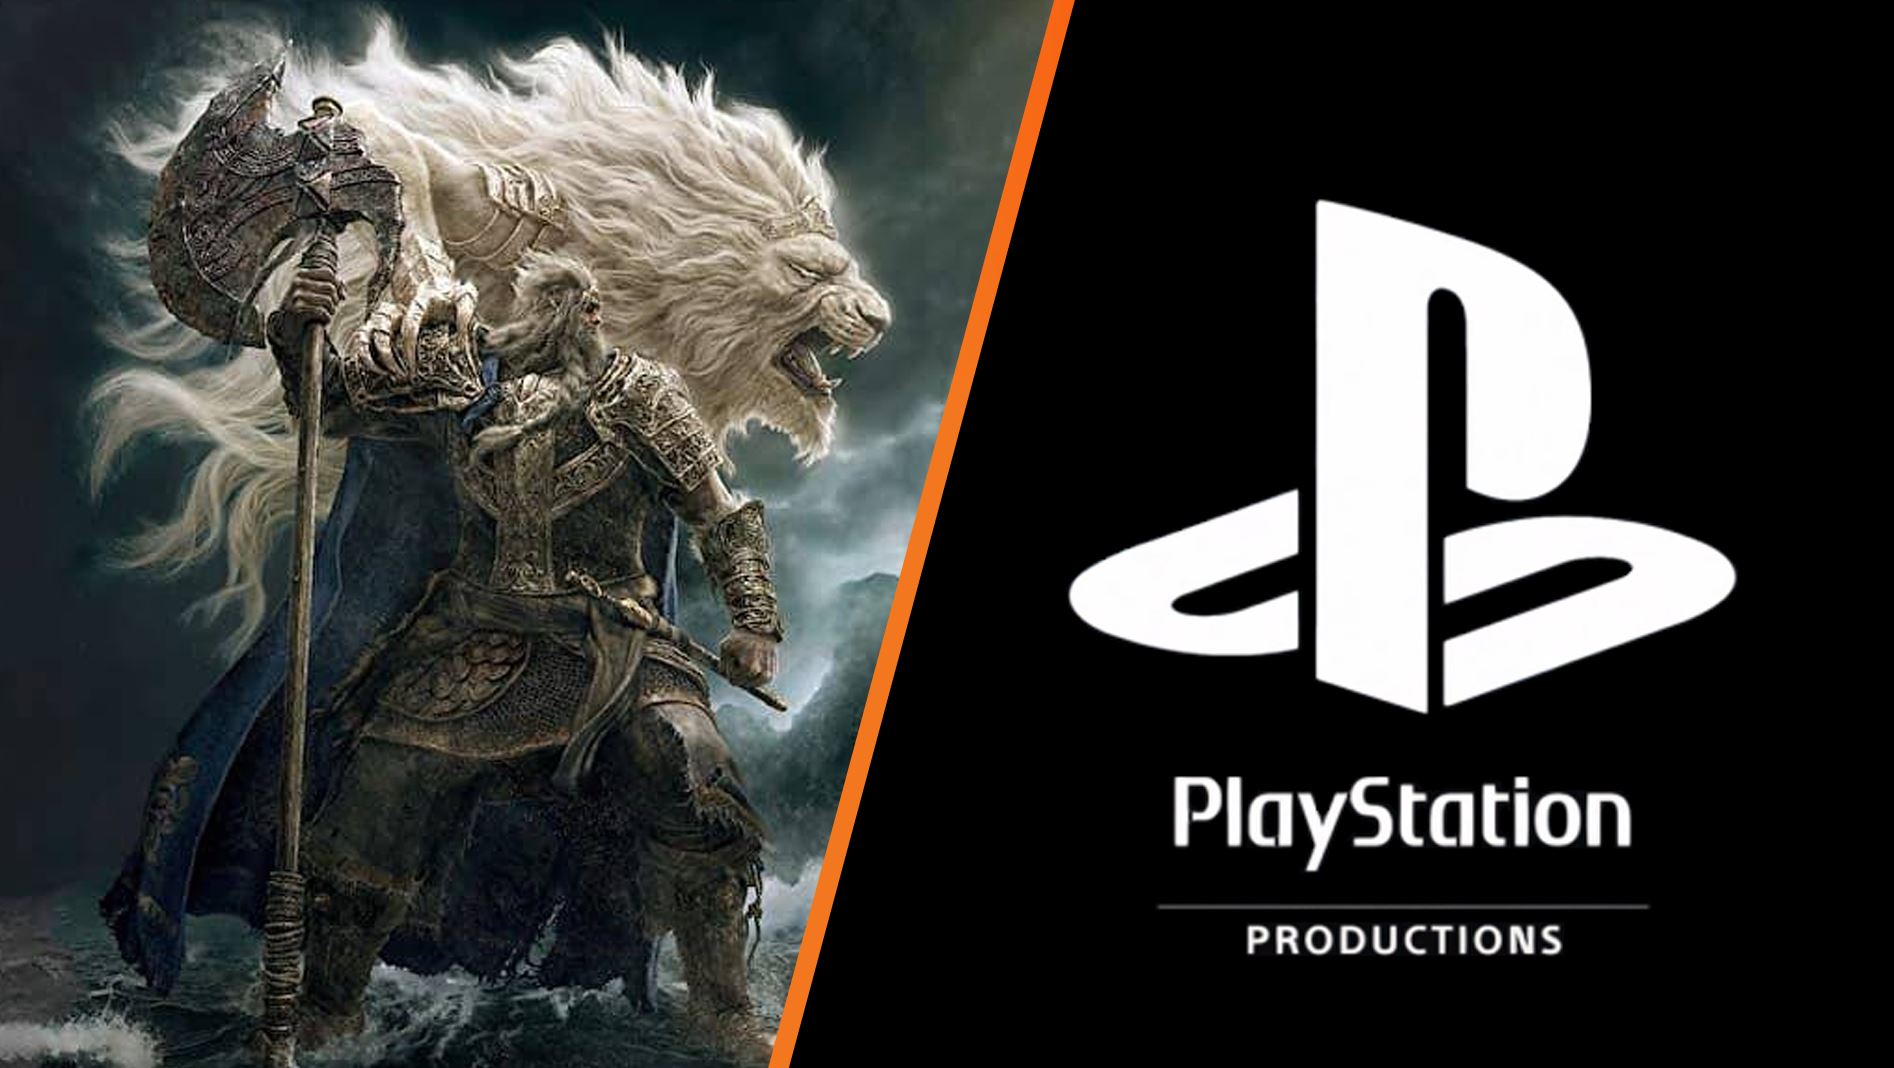 Sony’s investment in FromSoftware could lead to movies or TV shows, says Hulst | VGC